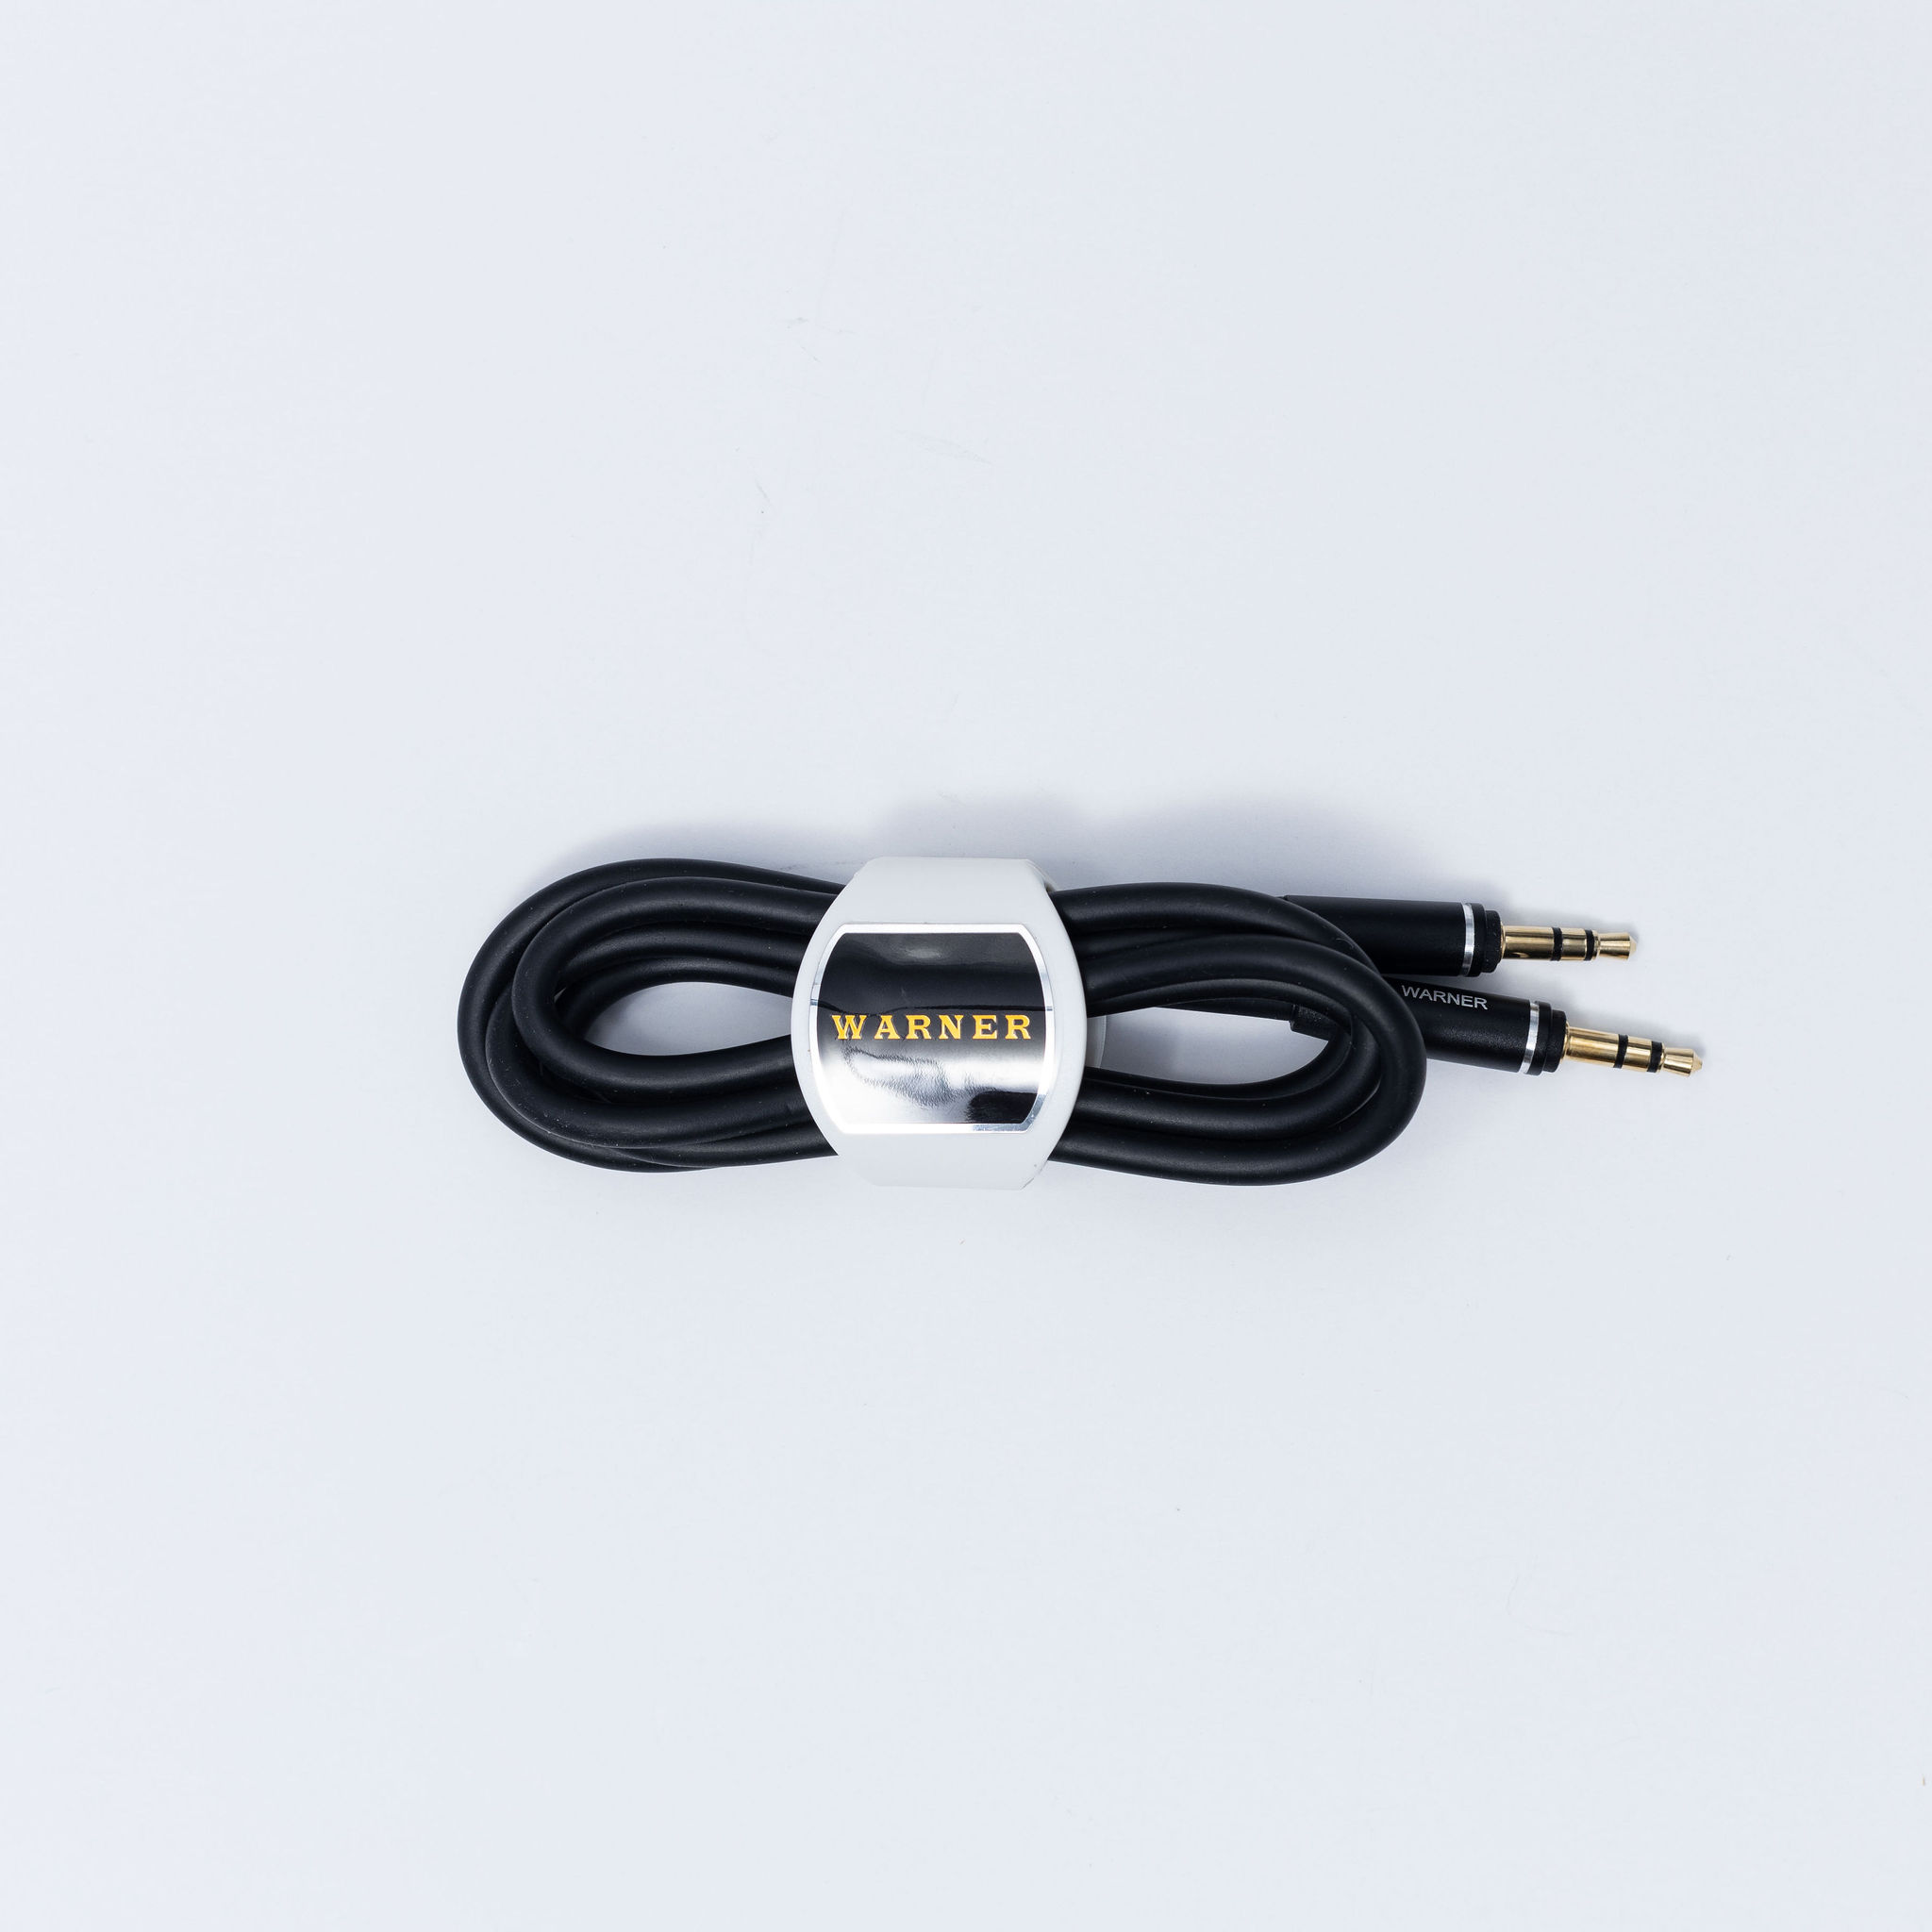 Warner Wireless Audio Cable